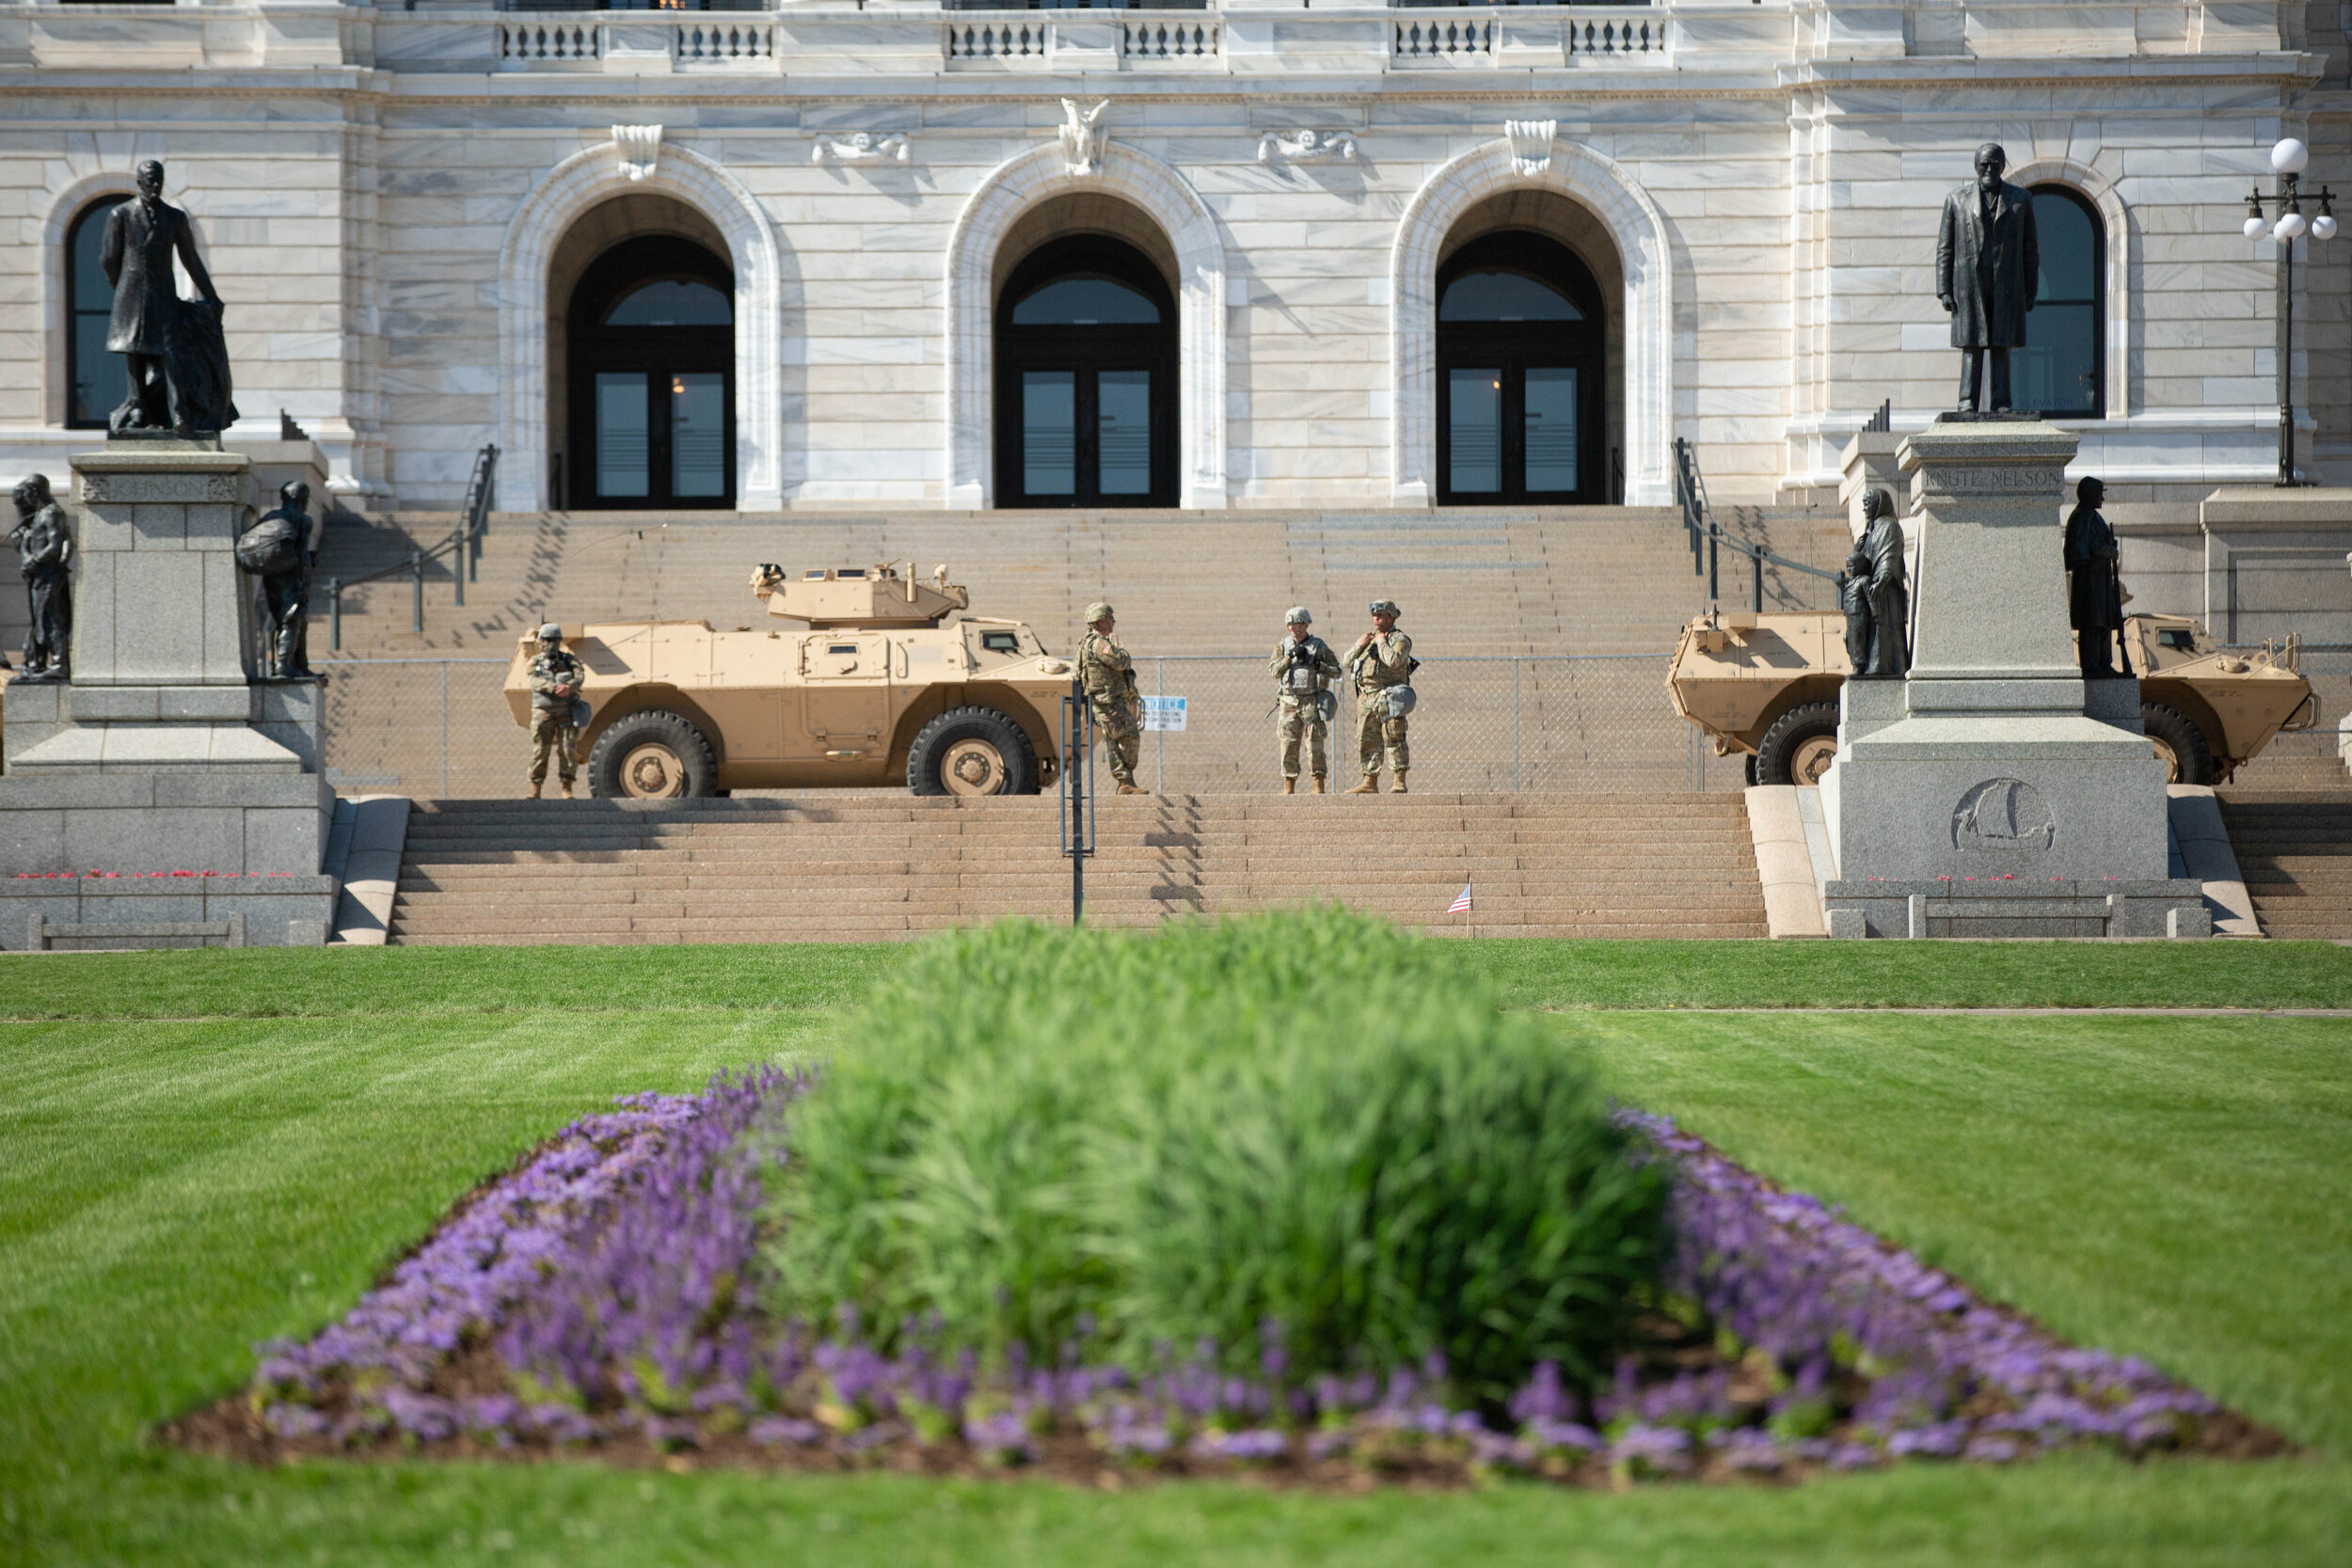  A blooming flower bed sits in front of Minnesota State Capitol as the National Guard set up armored vehicles and soldiers on the steps of the Captiol building in Saint Paul, Minnesota on June 1, 2020. Chris Juhn/Zenger 